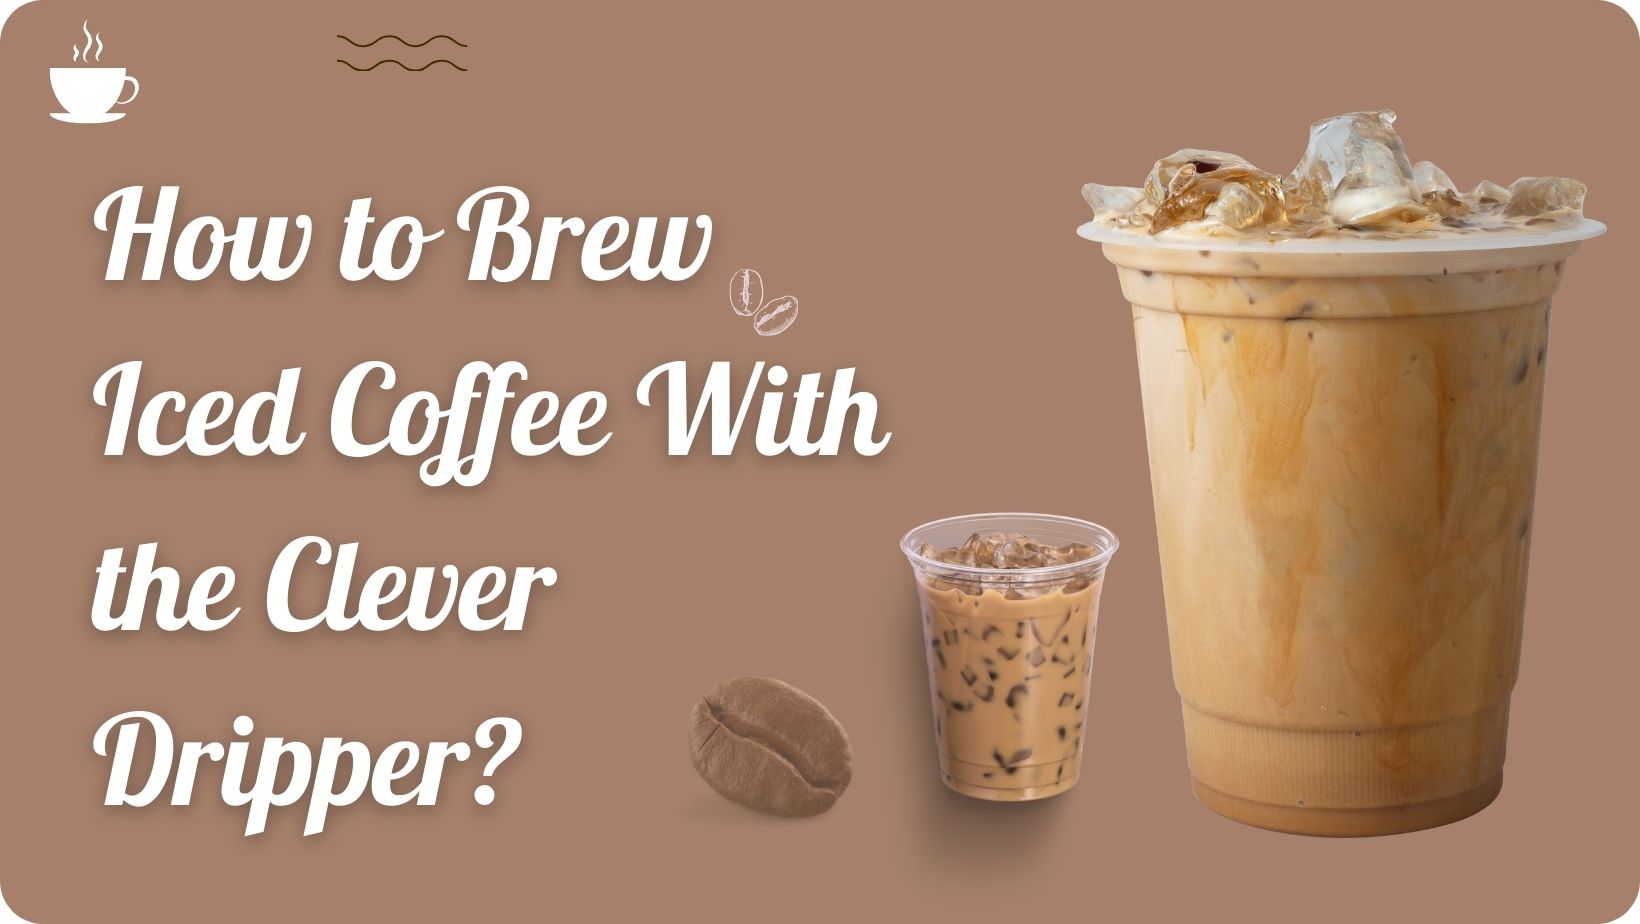 How to Brew Iced Coffee With the Clever Dripper?